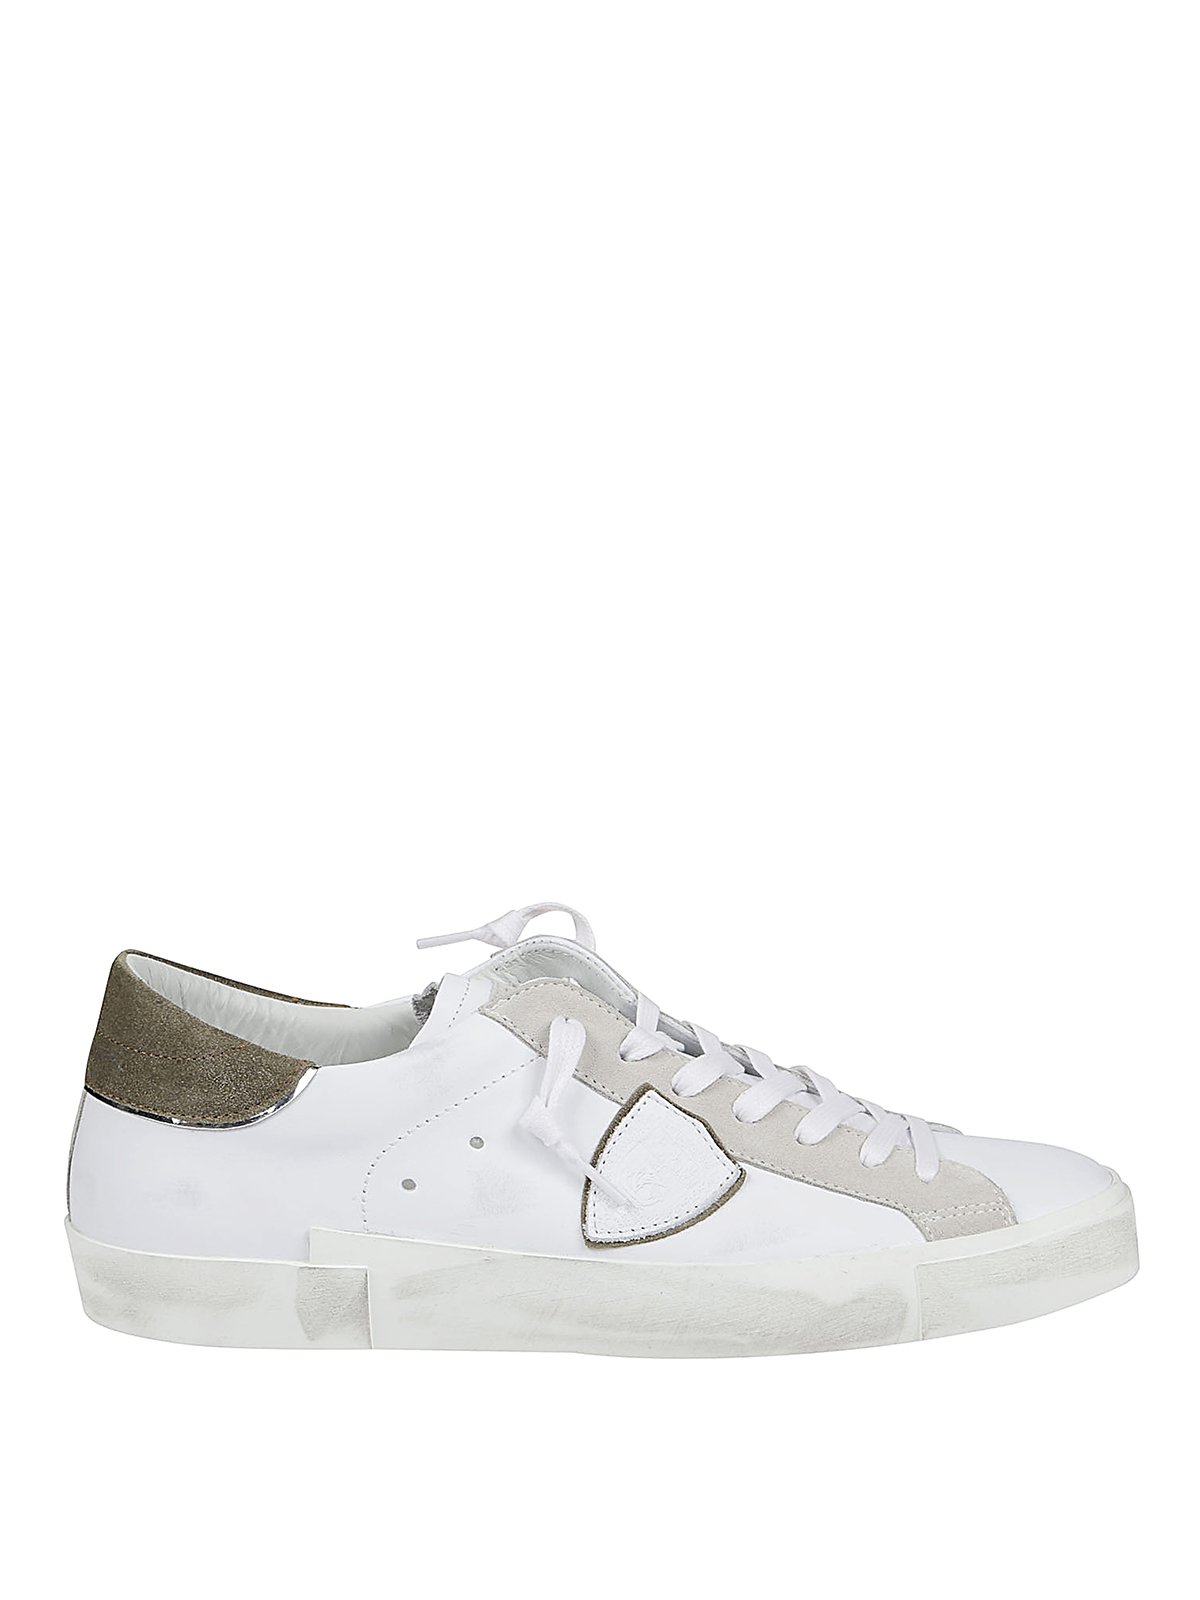 Philippe Model Paris X Sneakers In Leather With Suede Heel Tab In Blanco